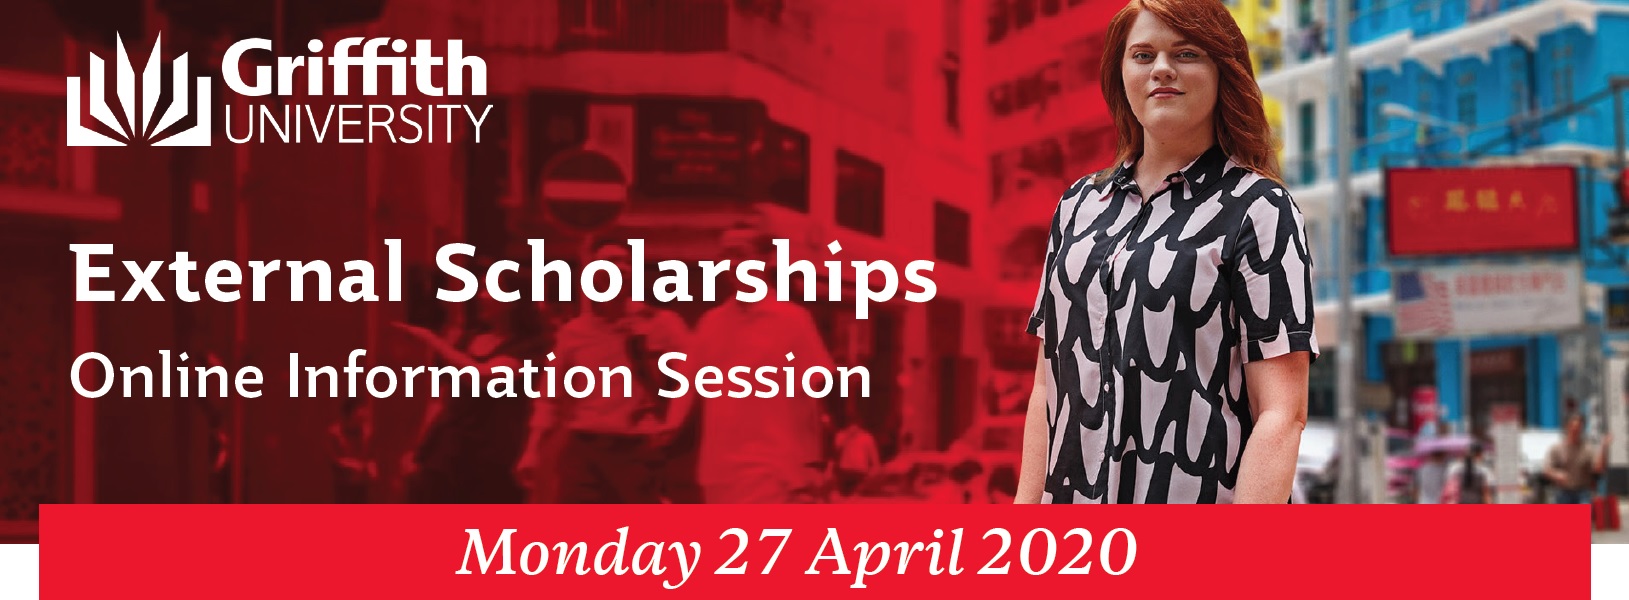 Griffith University External Scholarships Information Session